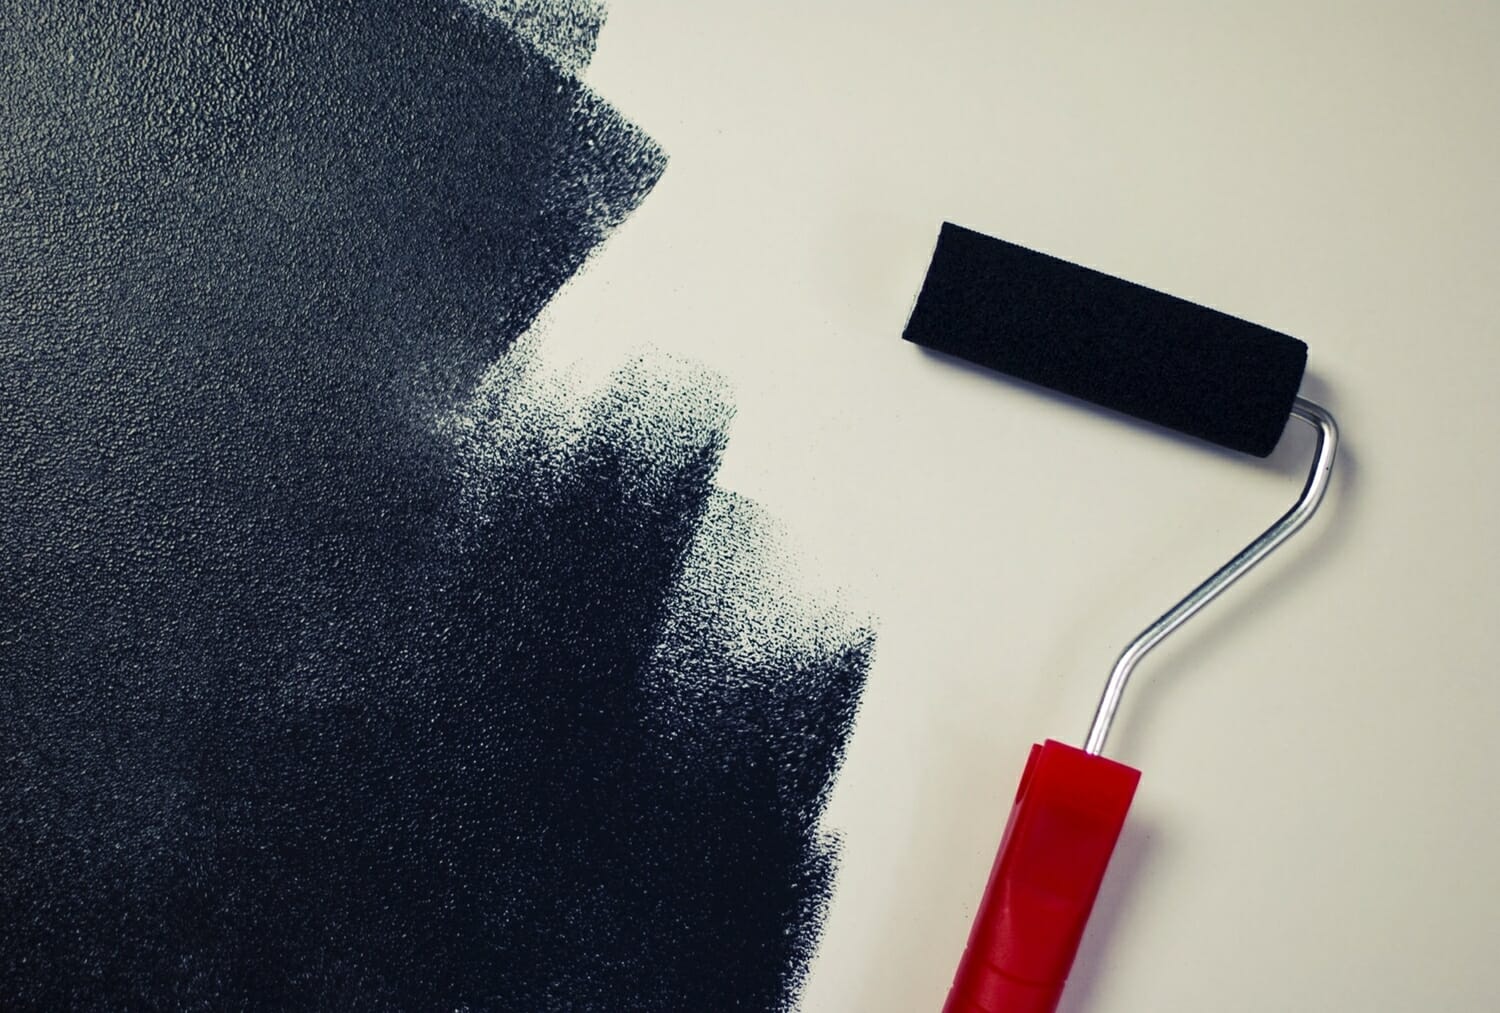 Why Landlords Should Be Proactive on Lead Paint in Properties